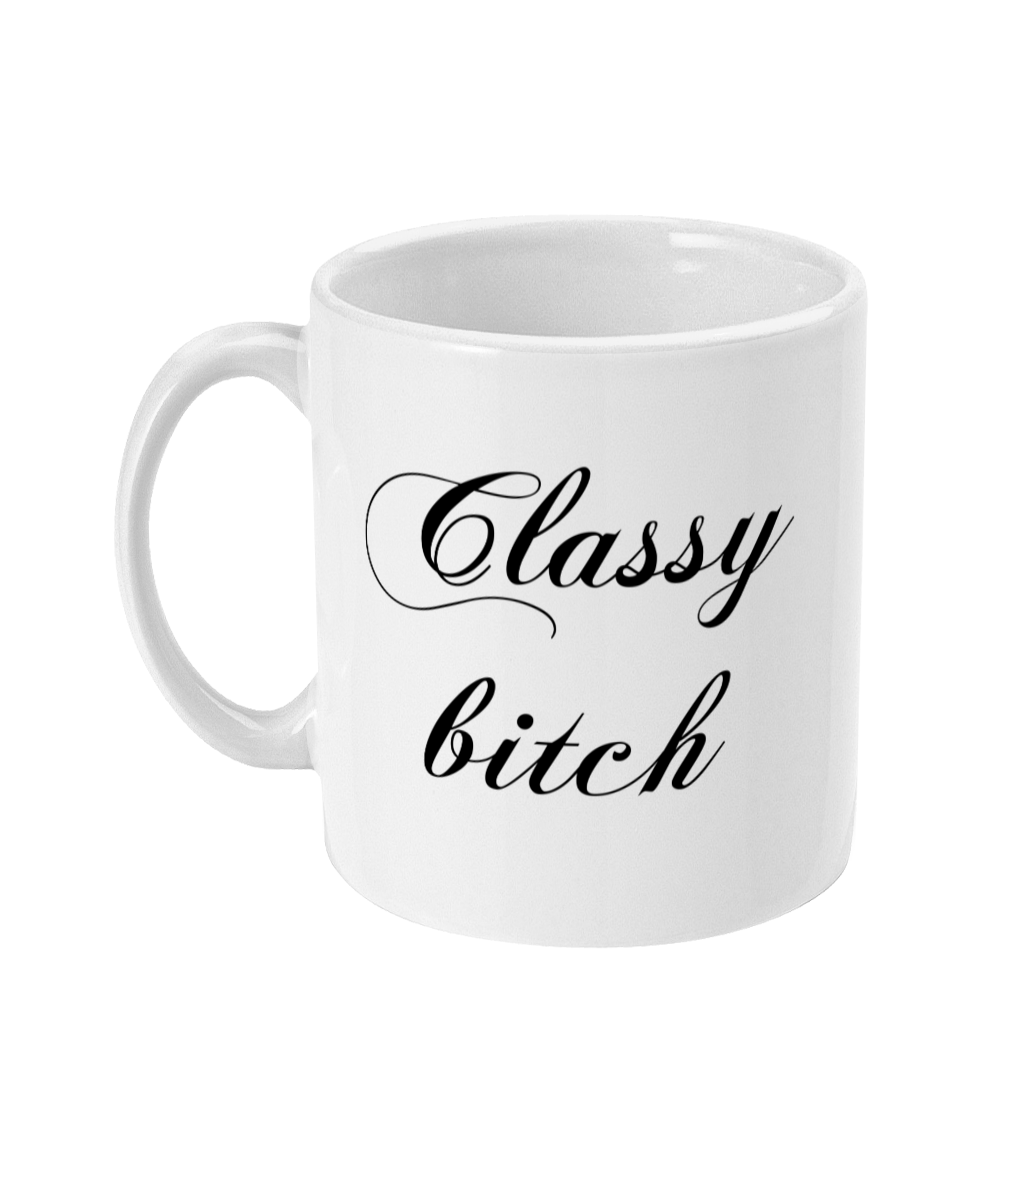 A 11oz glossy white mug with the words 'Classy bitch' in large cursive black font placed in its centre. The mug is placed against a plain white background. 